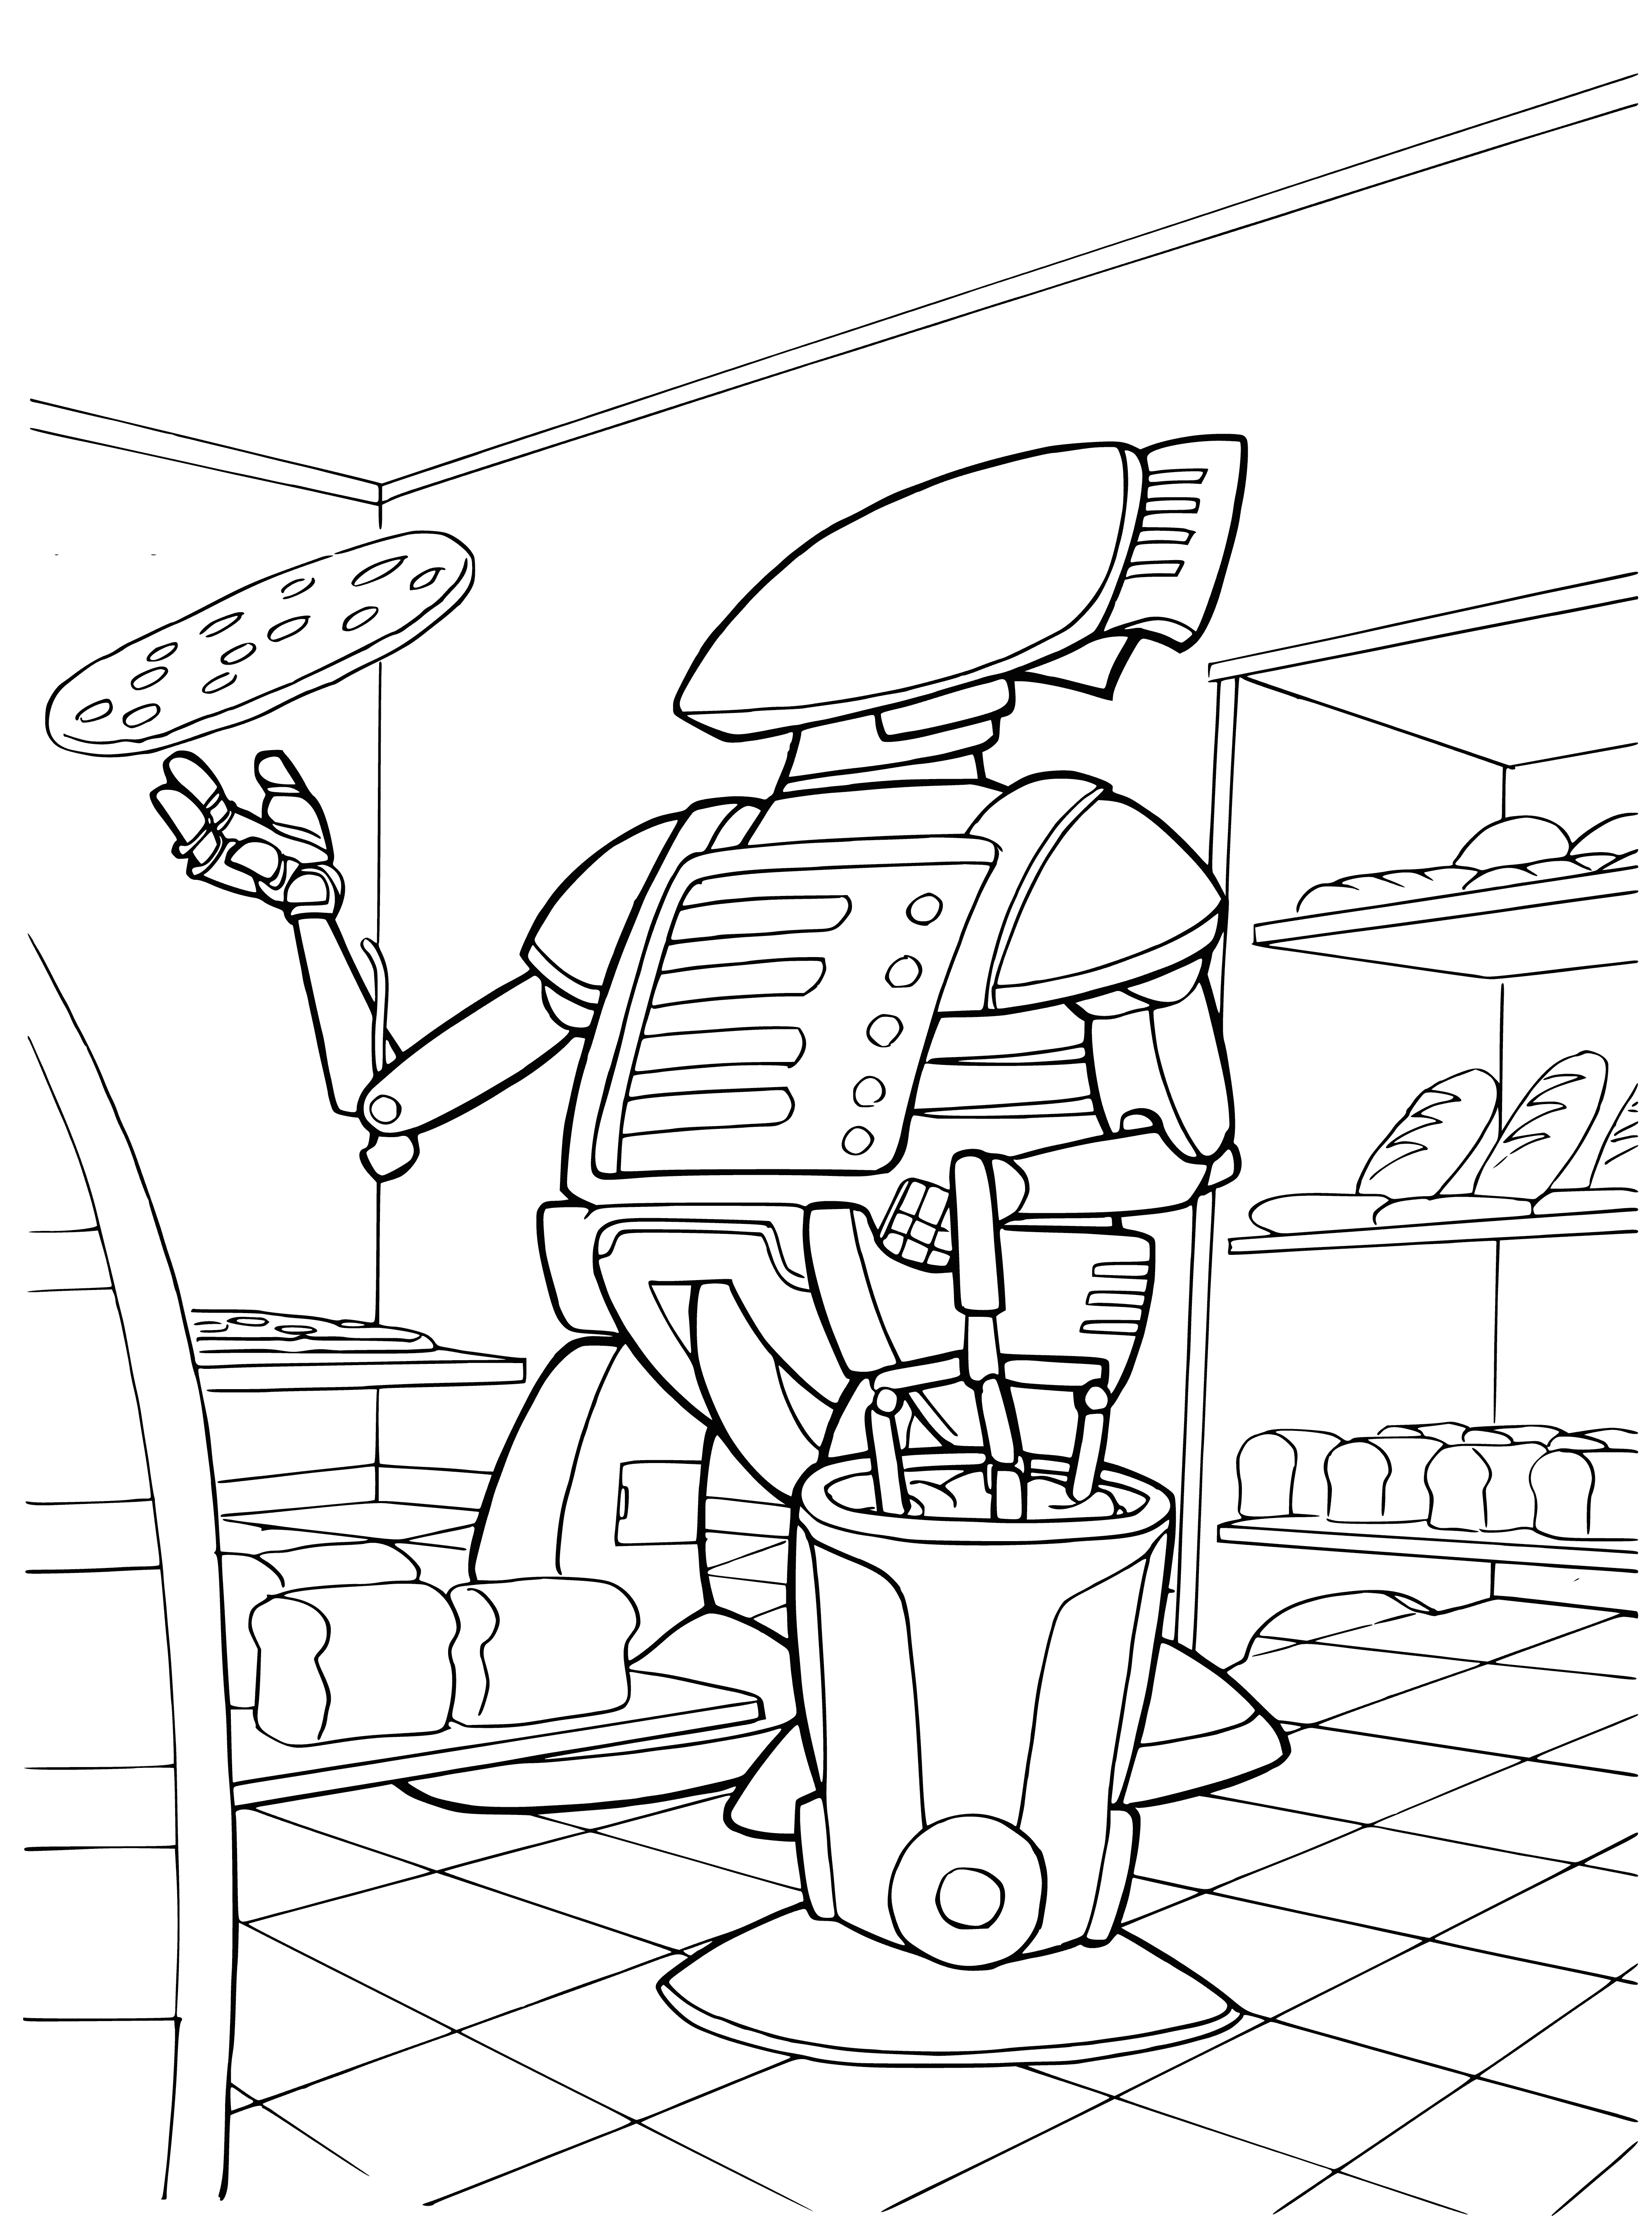 coloring page: Robot chef made of stainless steel capable of cooking meals & dishes from fresh ingredients & following recipes.